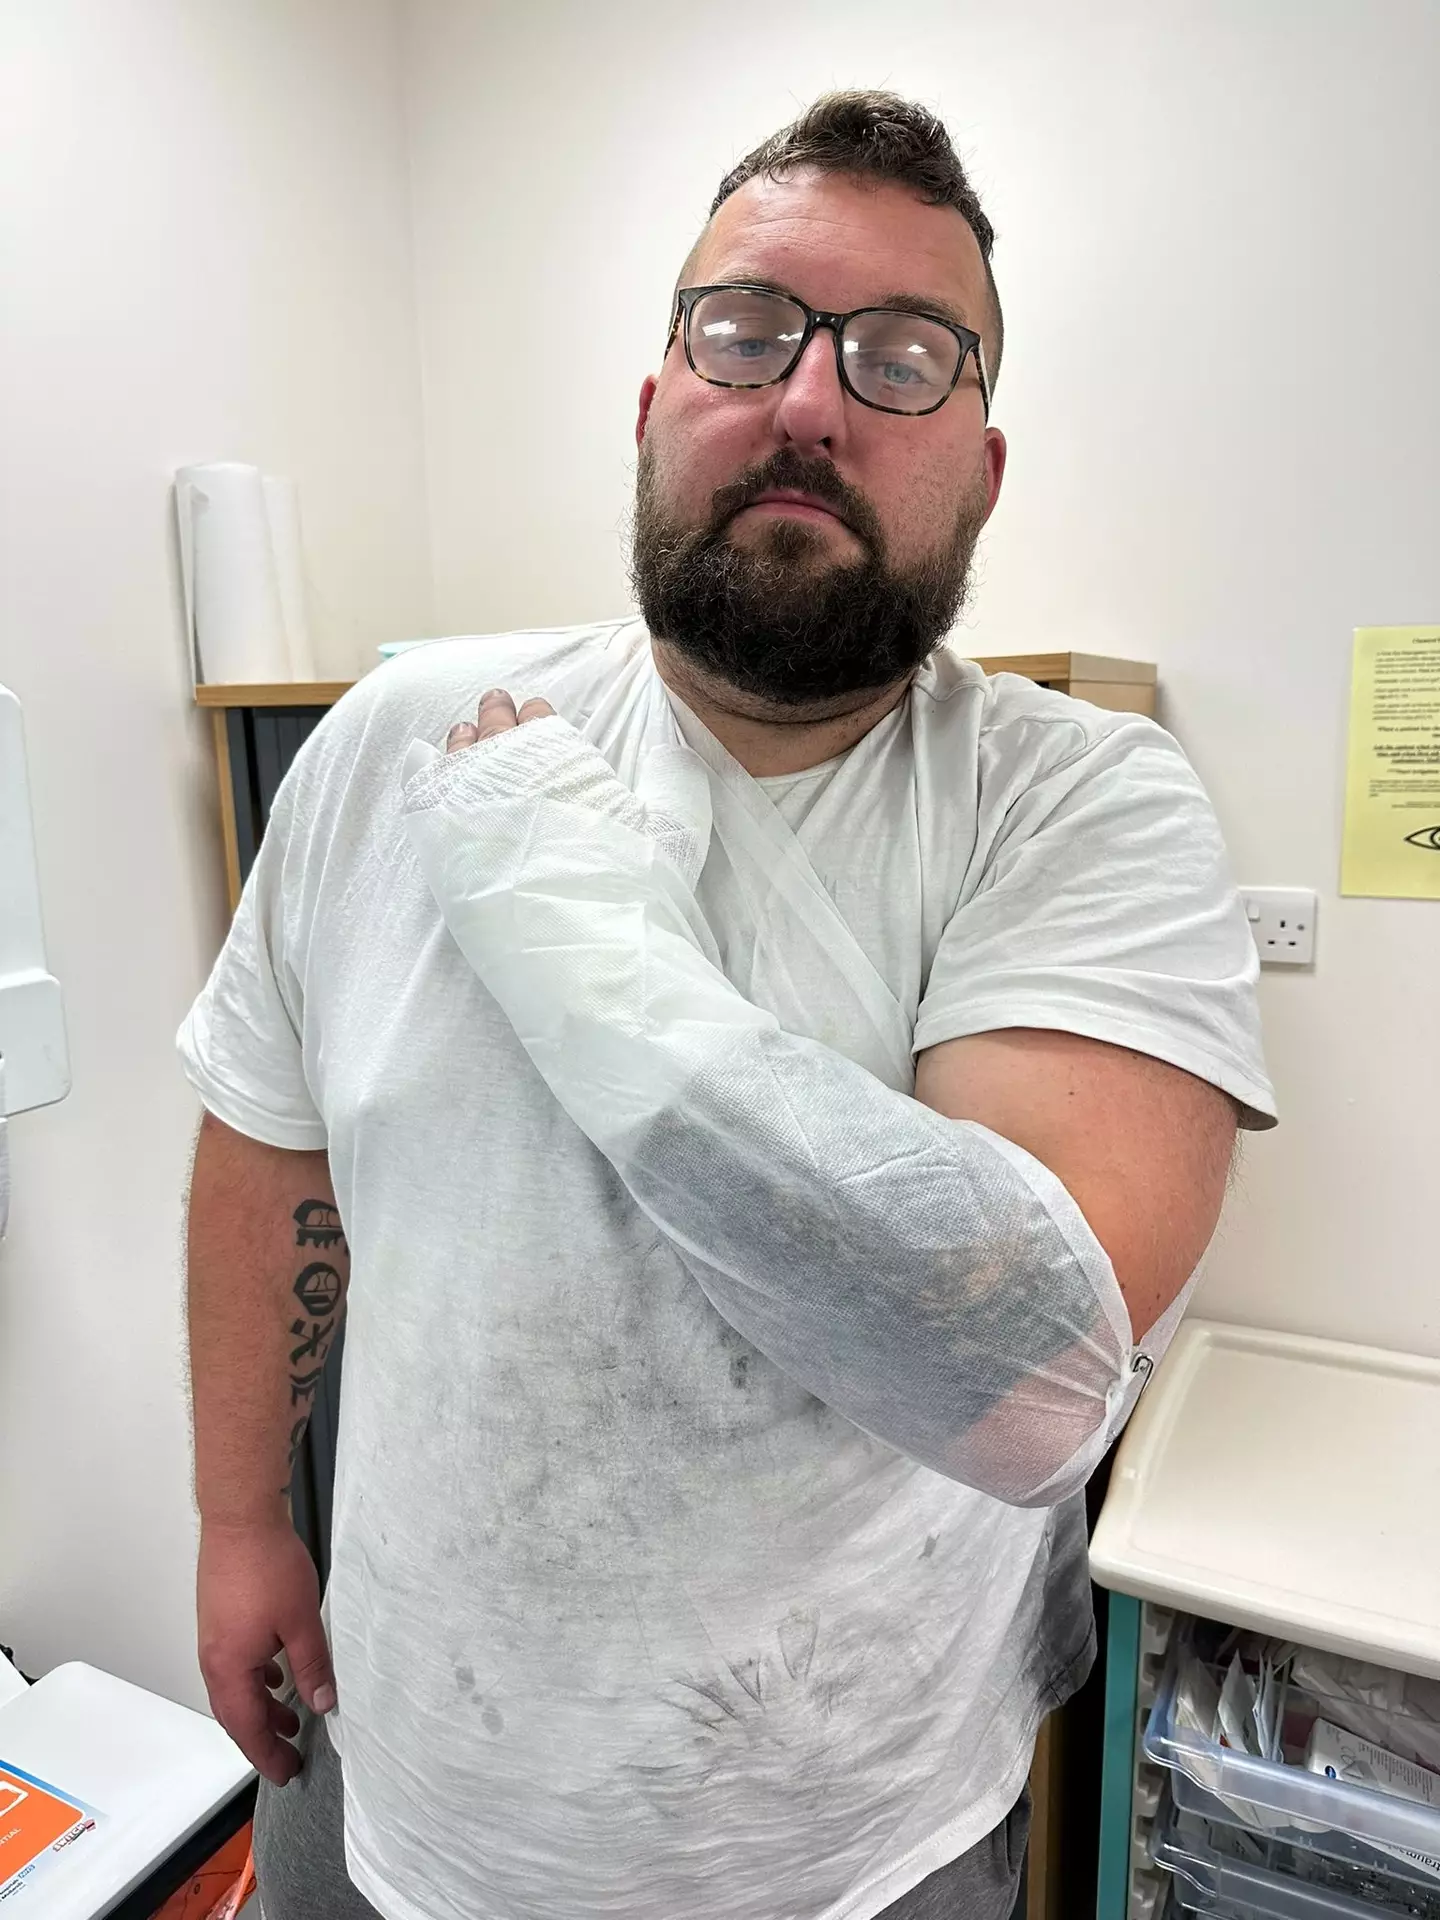 Mike Calver was changing the battery in his e-cigarette when it exploded in his hand.